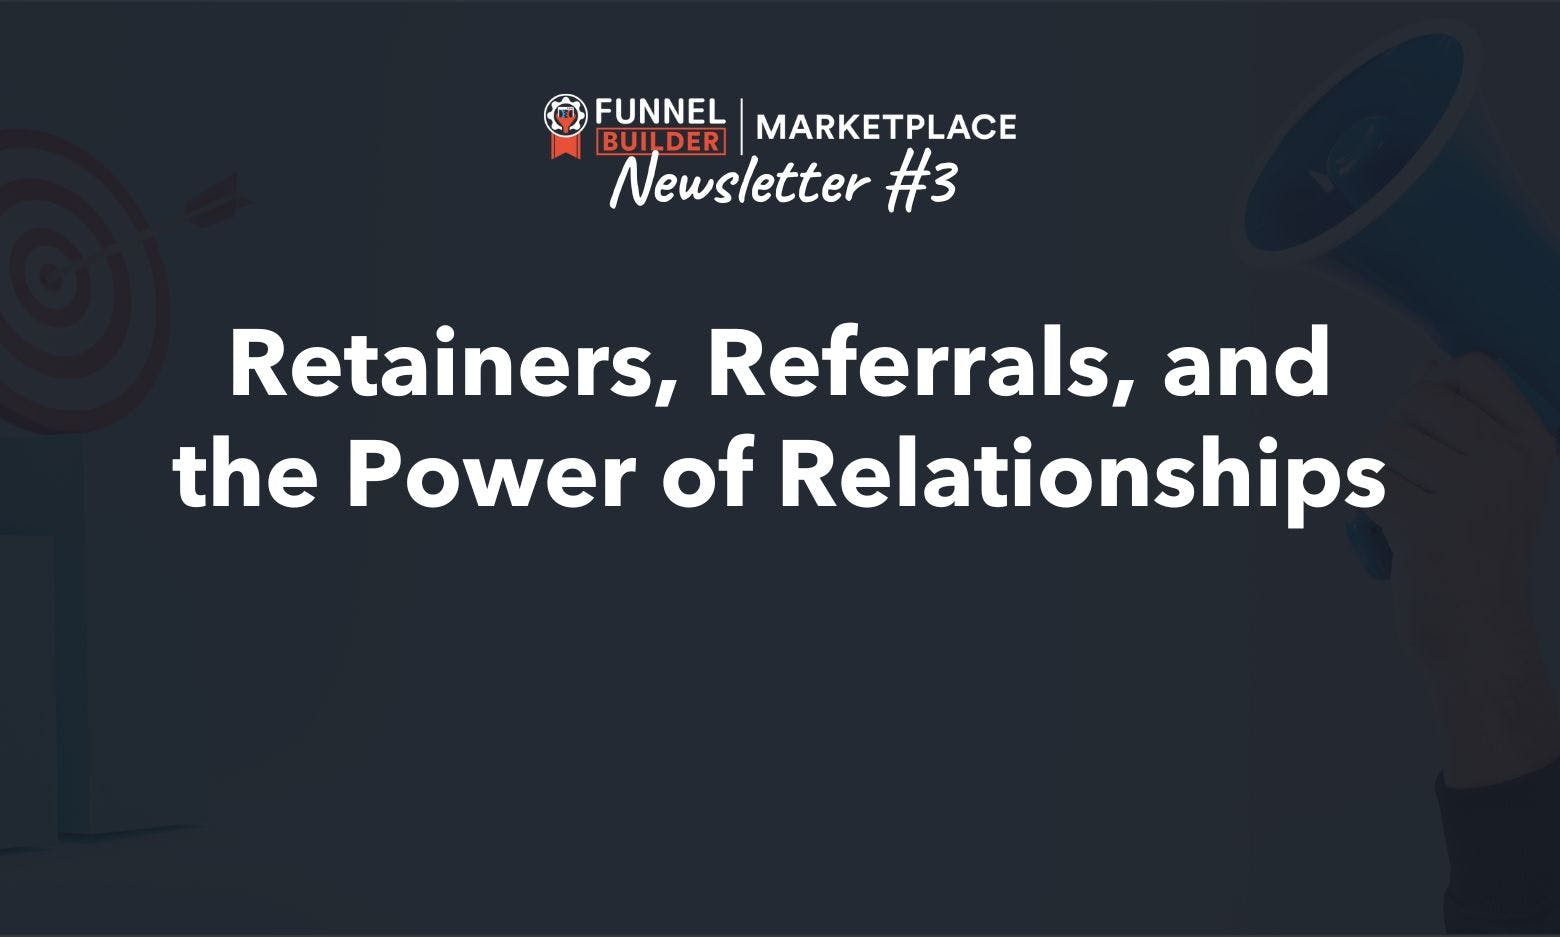 Newsletter #3: Retainers, Referrals, and the Power of Relationships